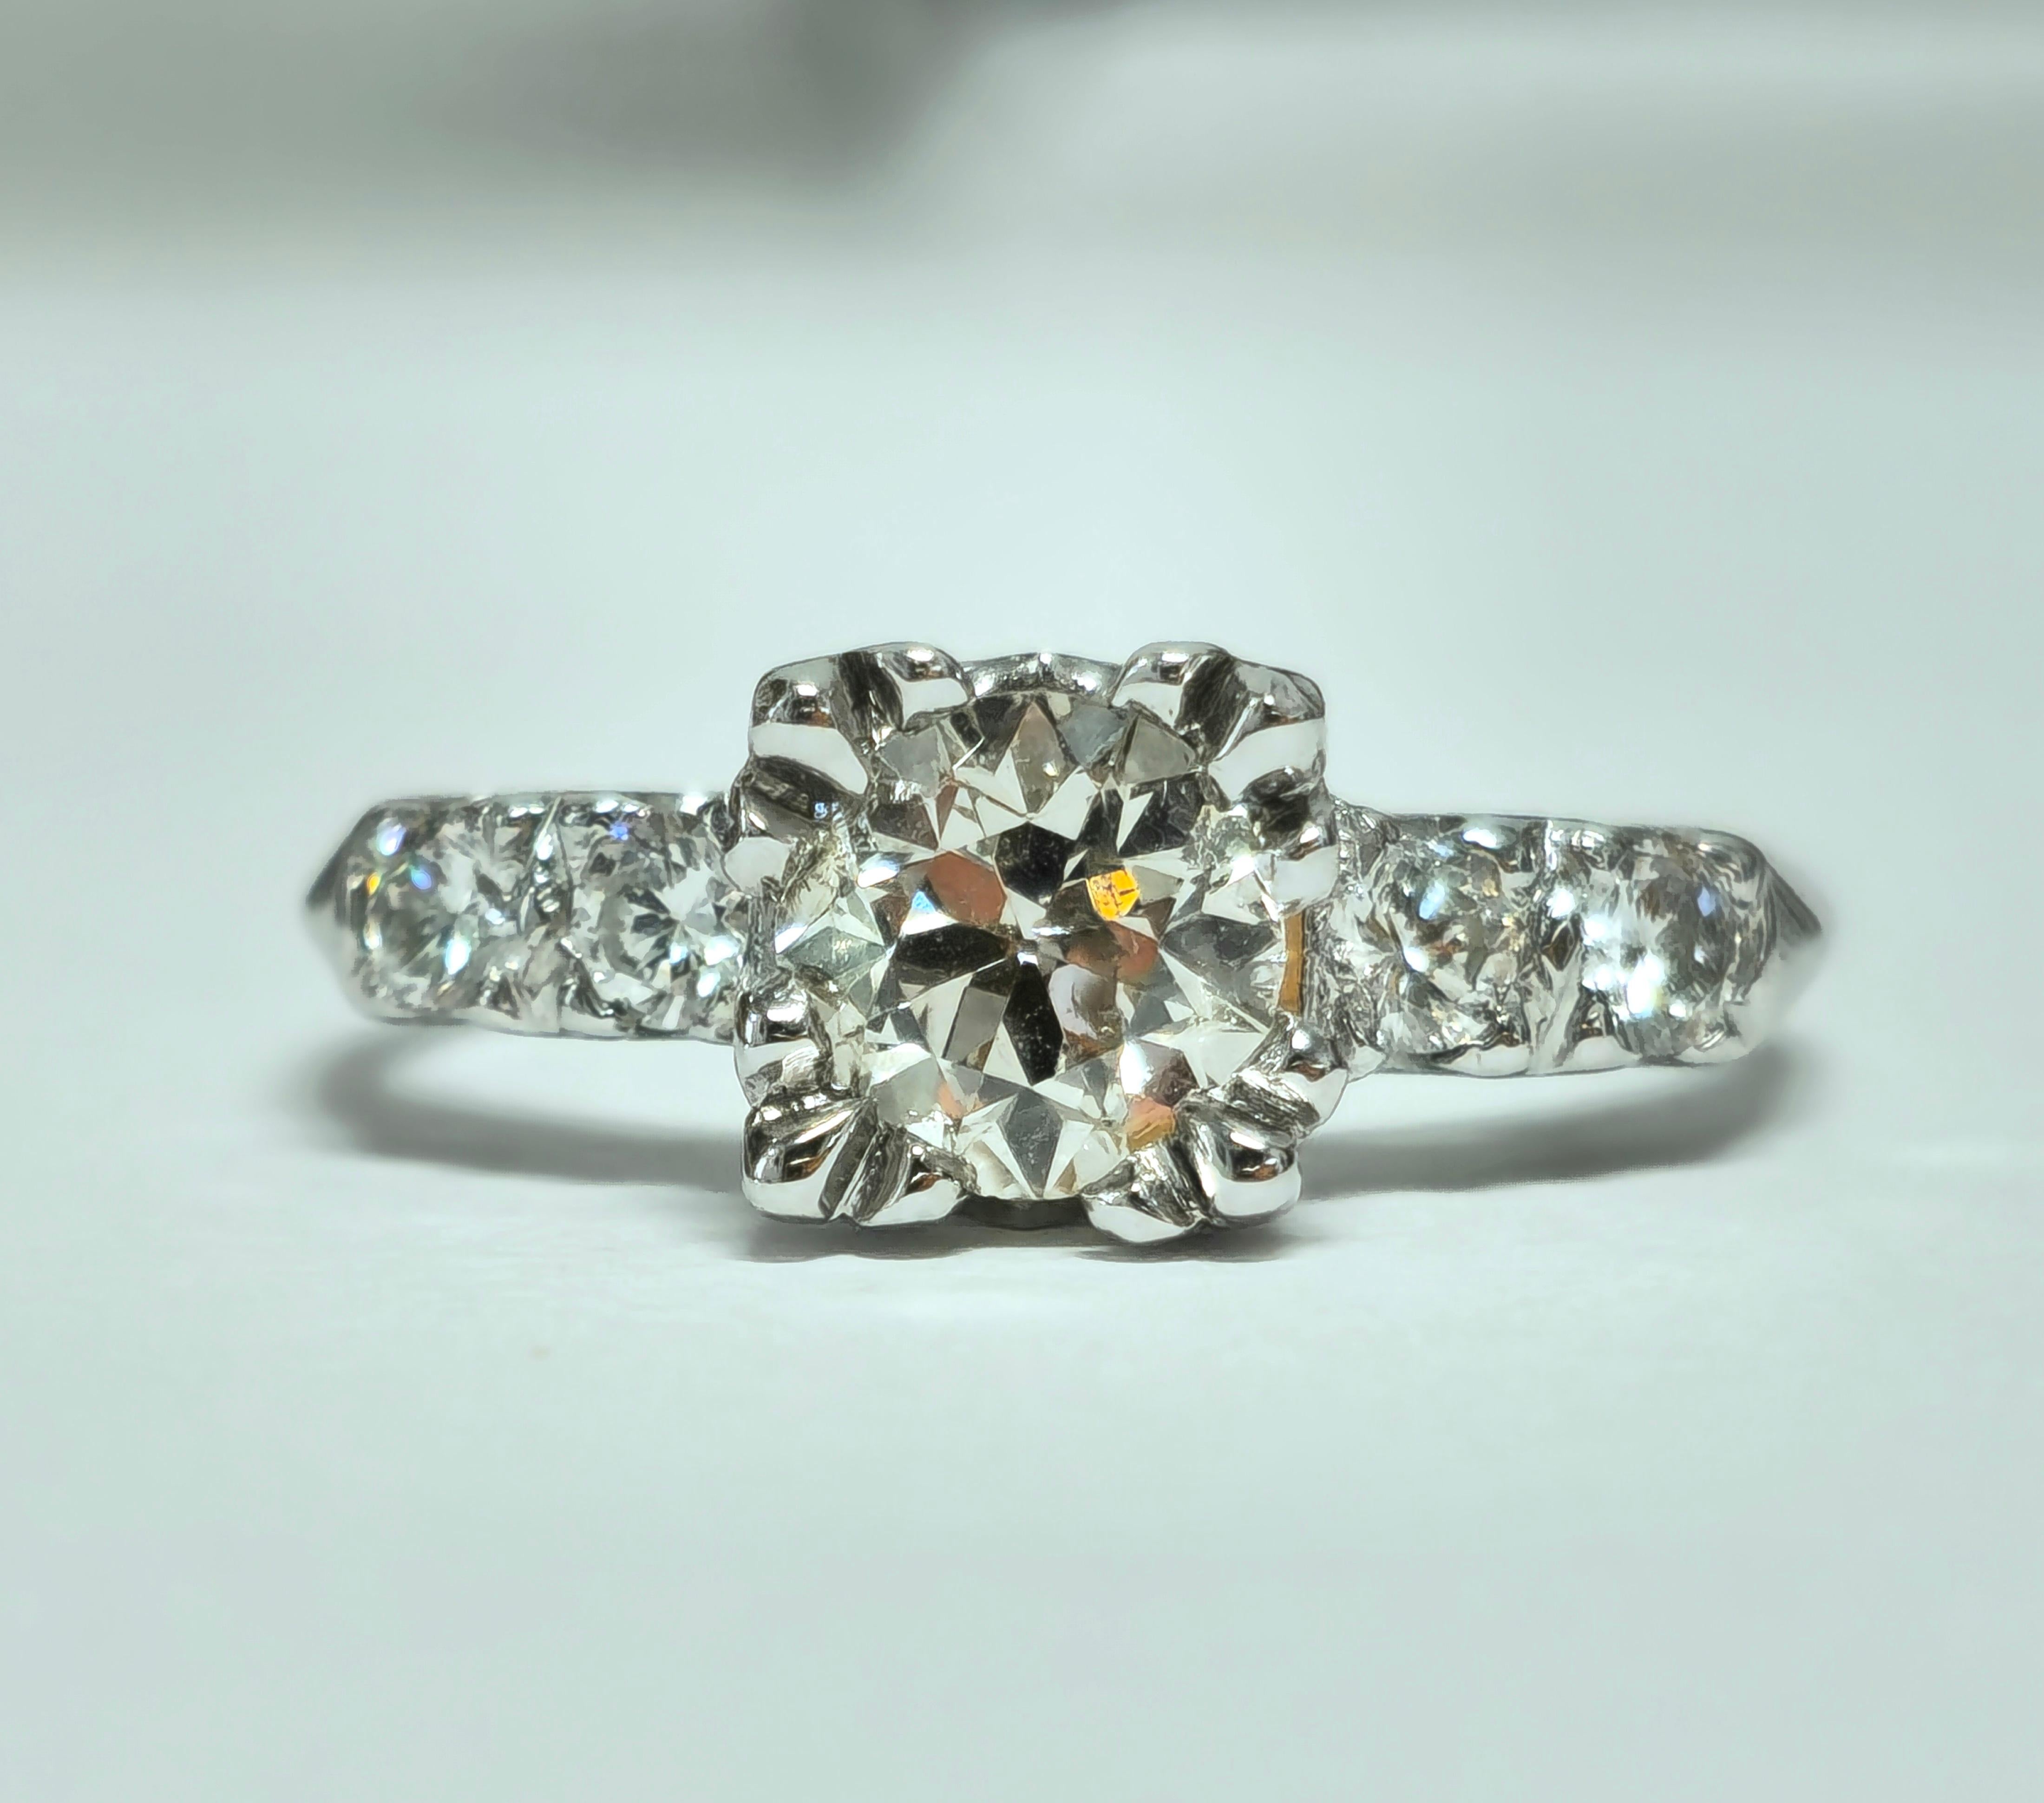 Step into timeless elegance with our breathtaking 14K White Gold Engagement Ring, adorned with a stunning 1.35 Carat center diamond. Complemented by side stones weighing 0.35 Carats, this exquisite ring exudes sophistication and grace, perfect for